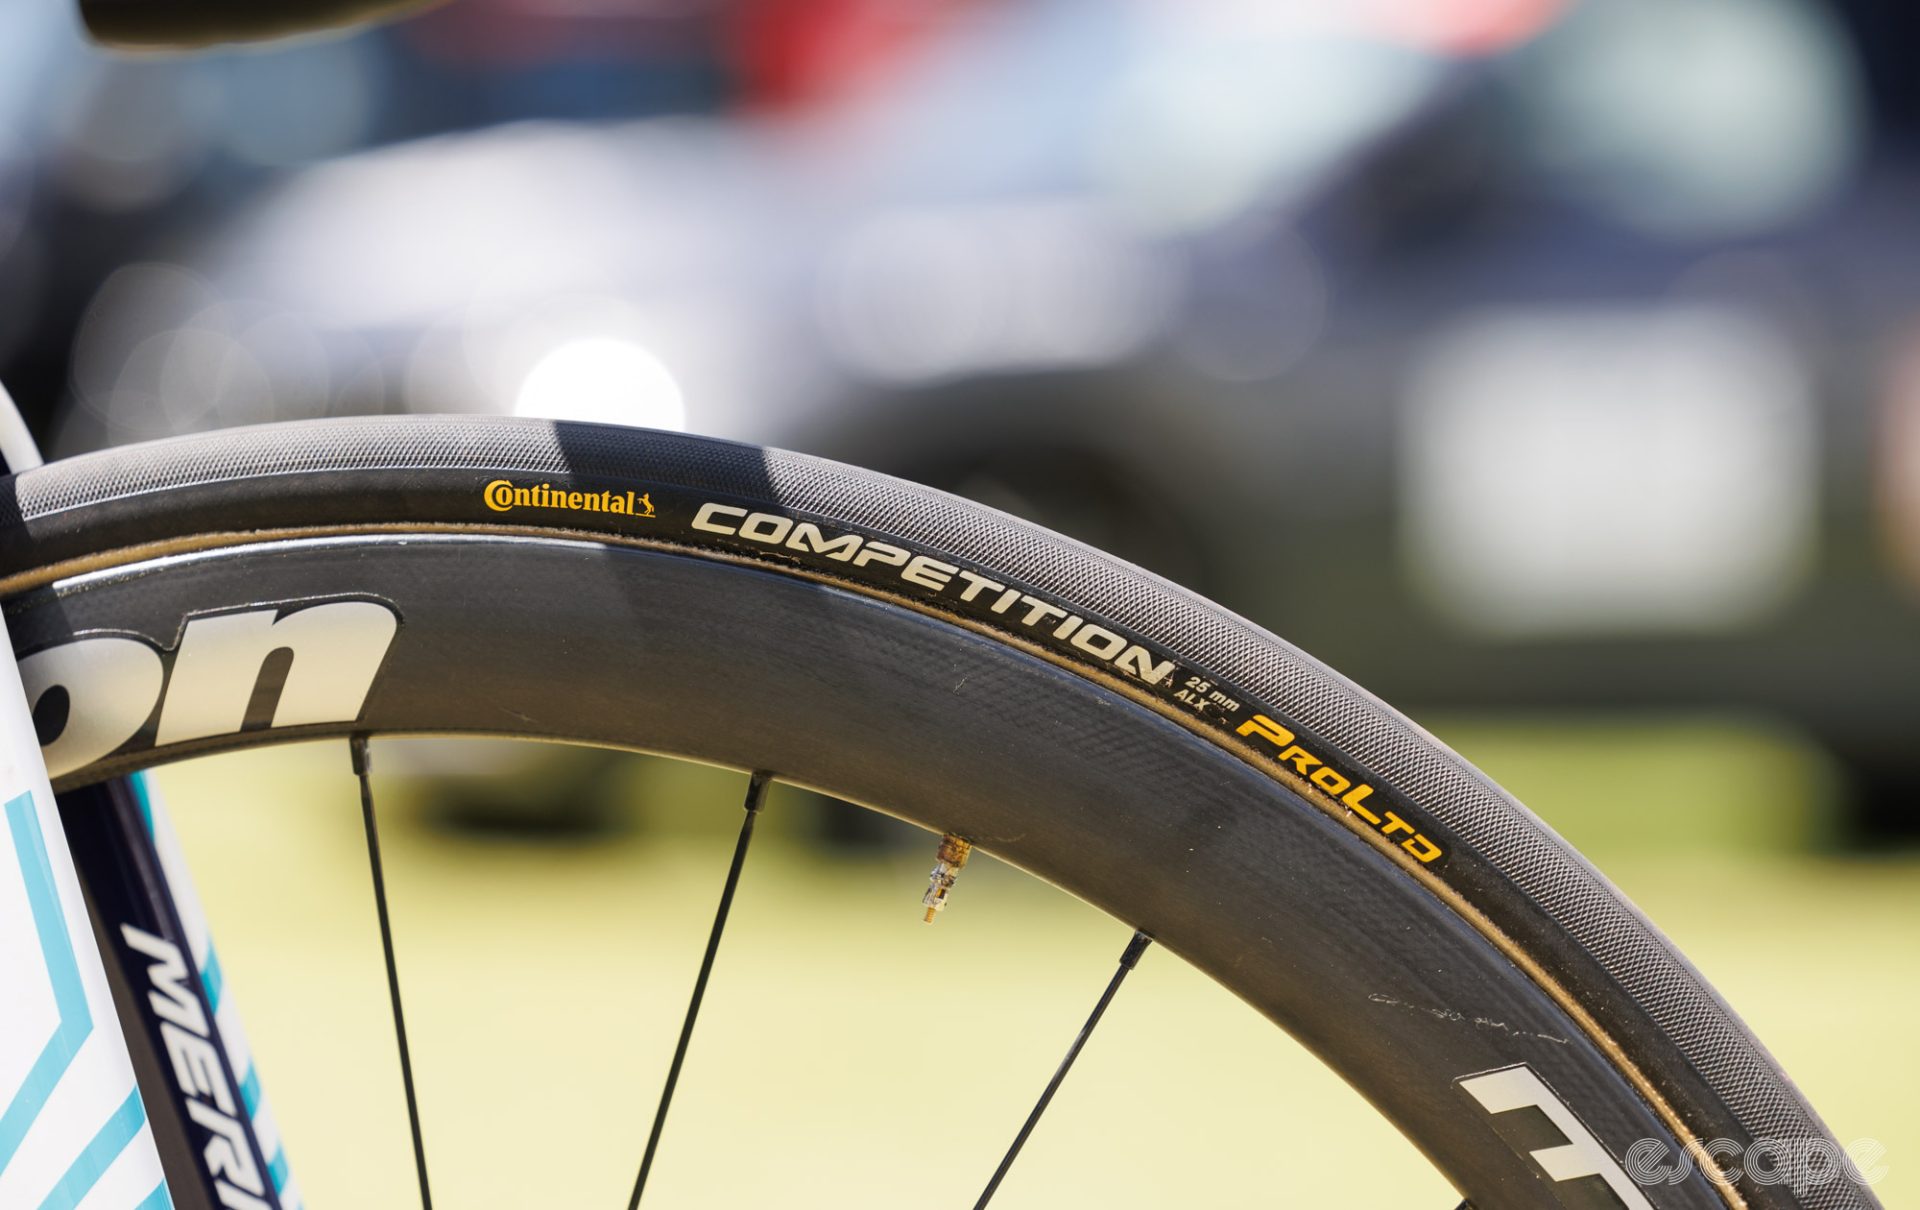 Vision wheels and Continental Competition tubular tires.